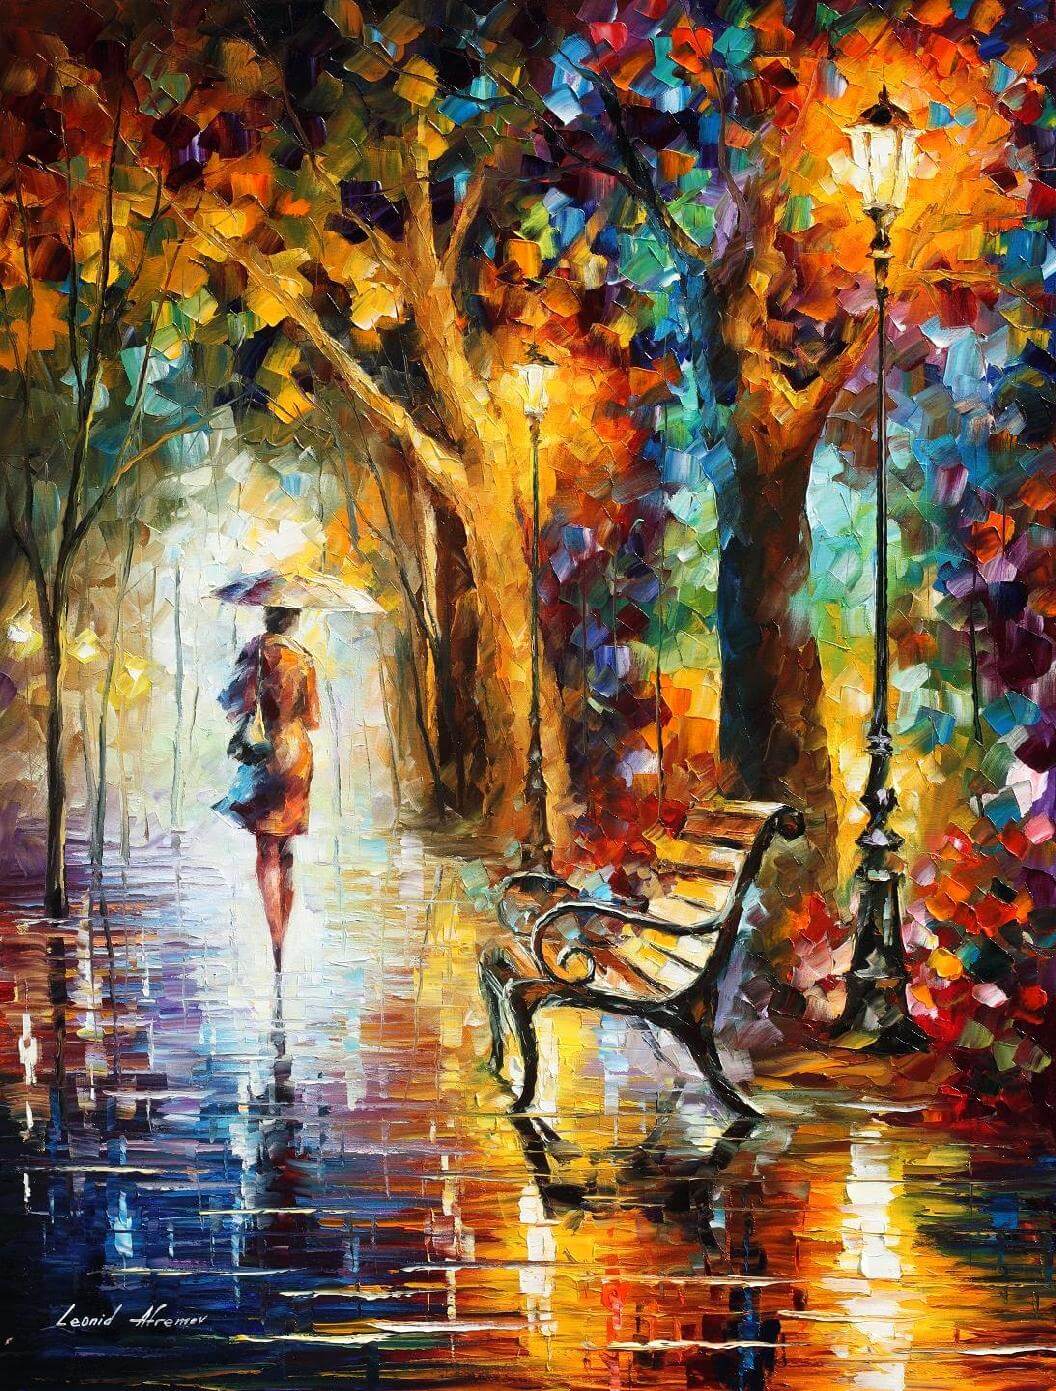 THE END OF PATIENCE - Afremov - Paint By Numbers Kit